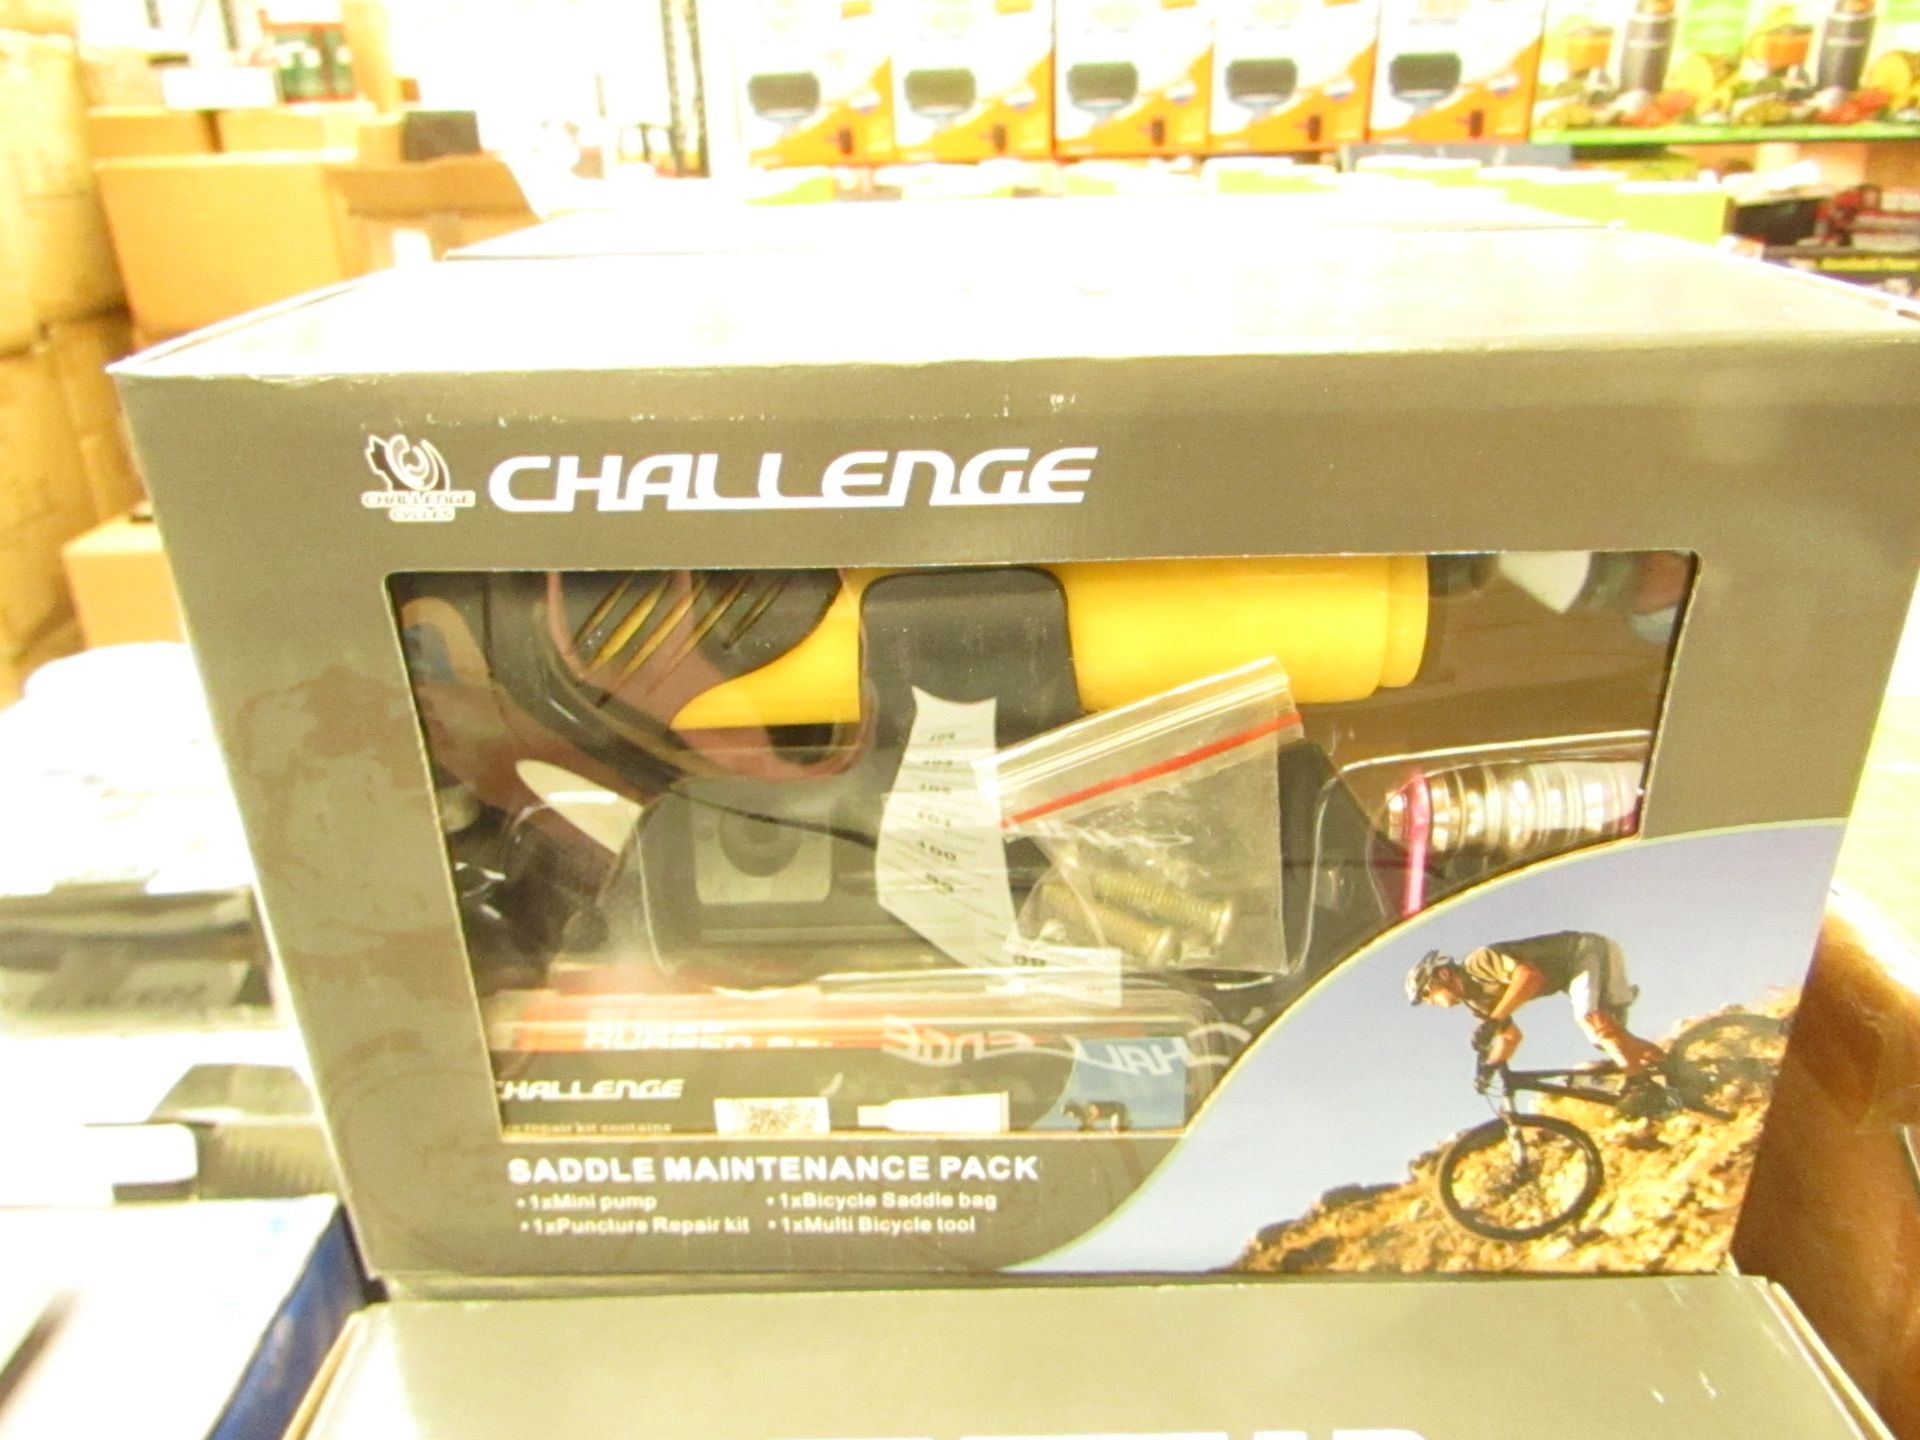 Challenge saddle maintenance pack, new and boxed.